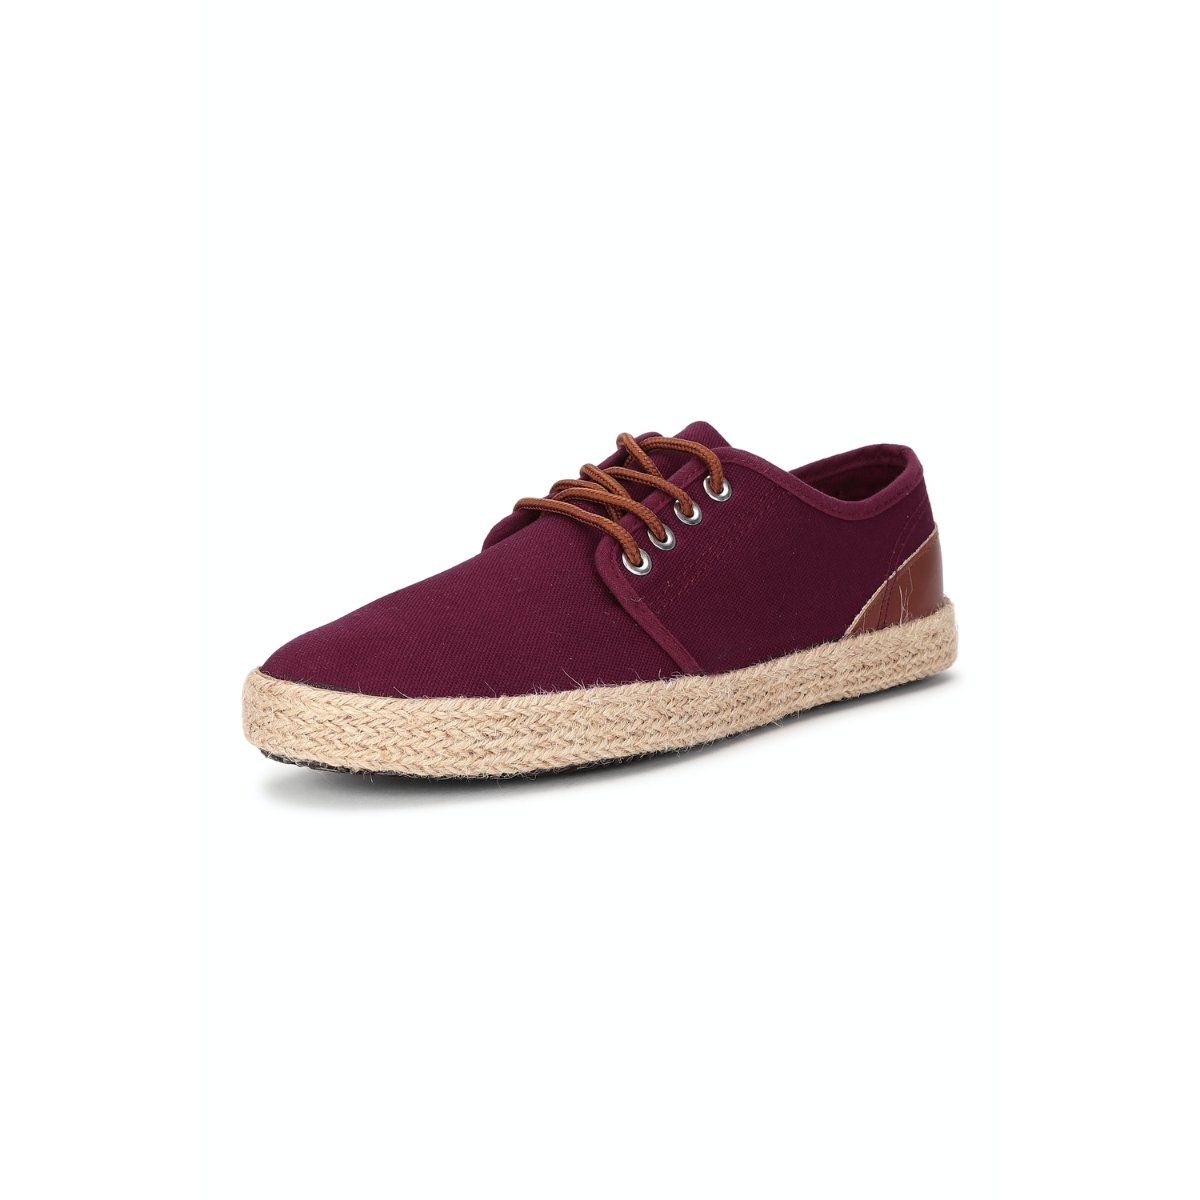 Allen Solly Pink Lace Up Shoes Sneakers For Women - Buy Allen Solly Pink  Lace Up Shoes Sneakers For Women Online at Best Price - Shop Online for  Footwears in India | Flipkart.com